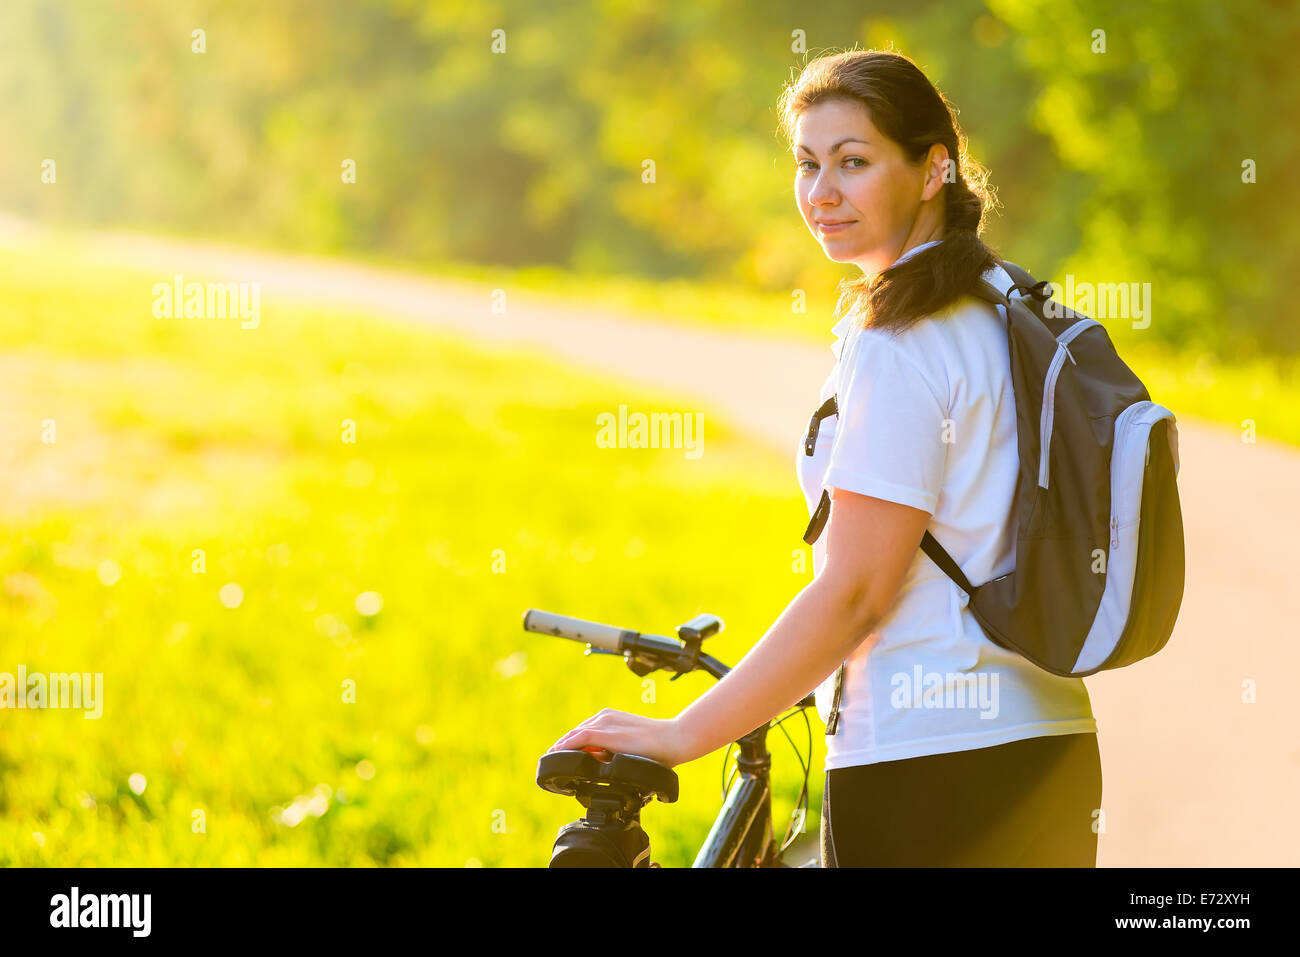 beautiful athlete with a backpack on a bicycle Stock Photo